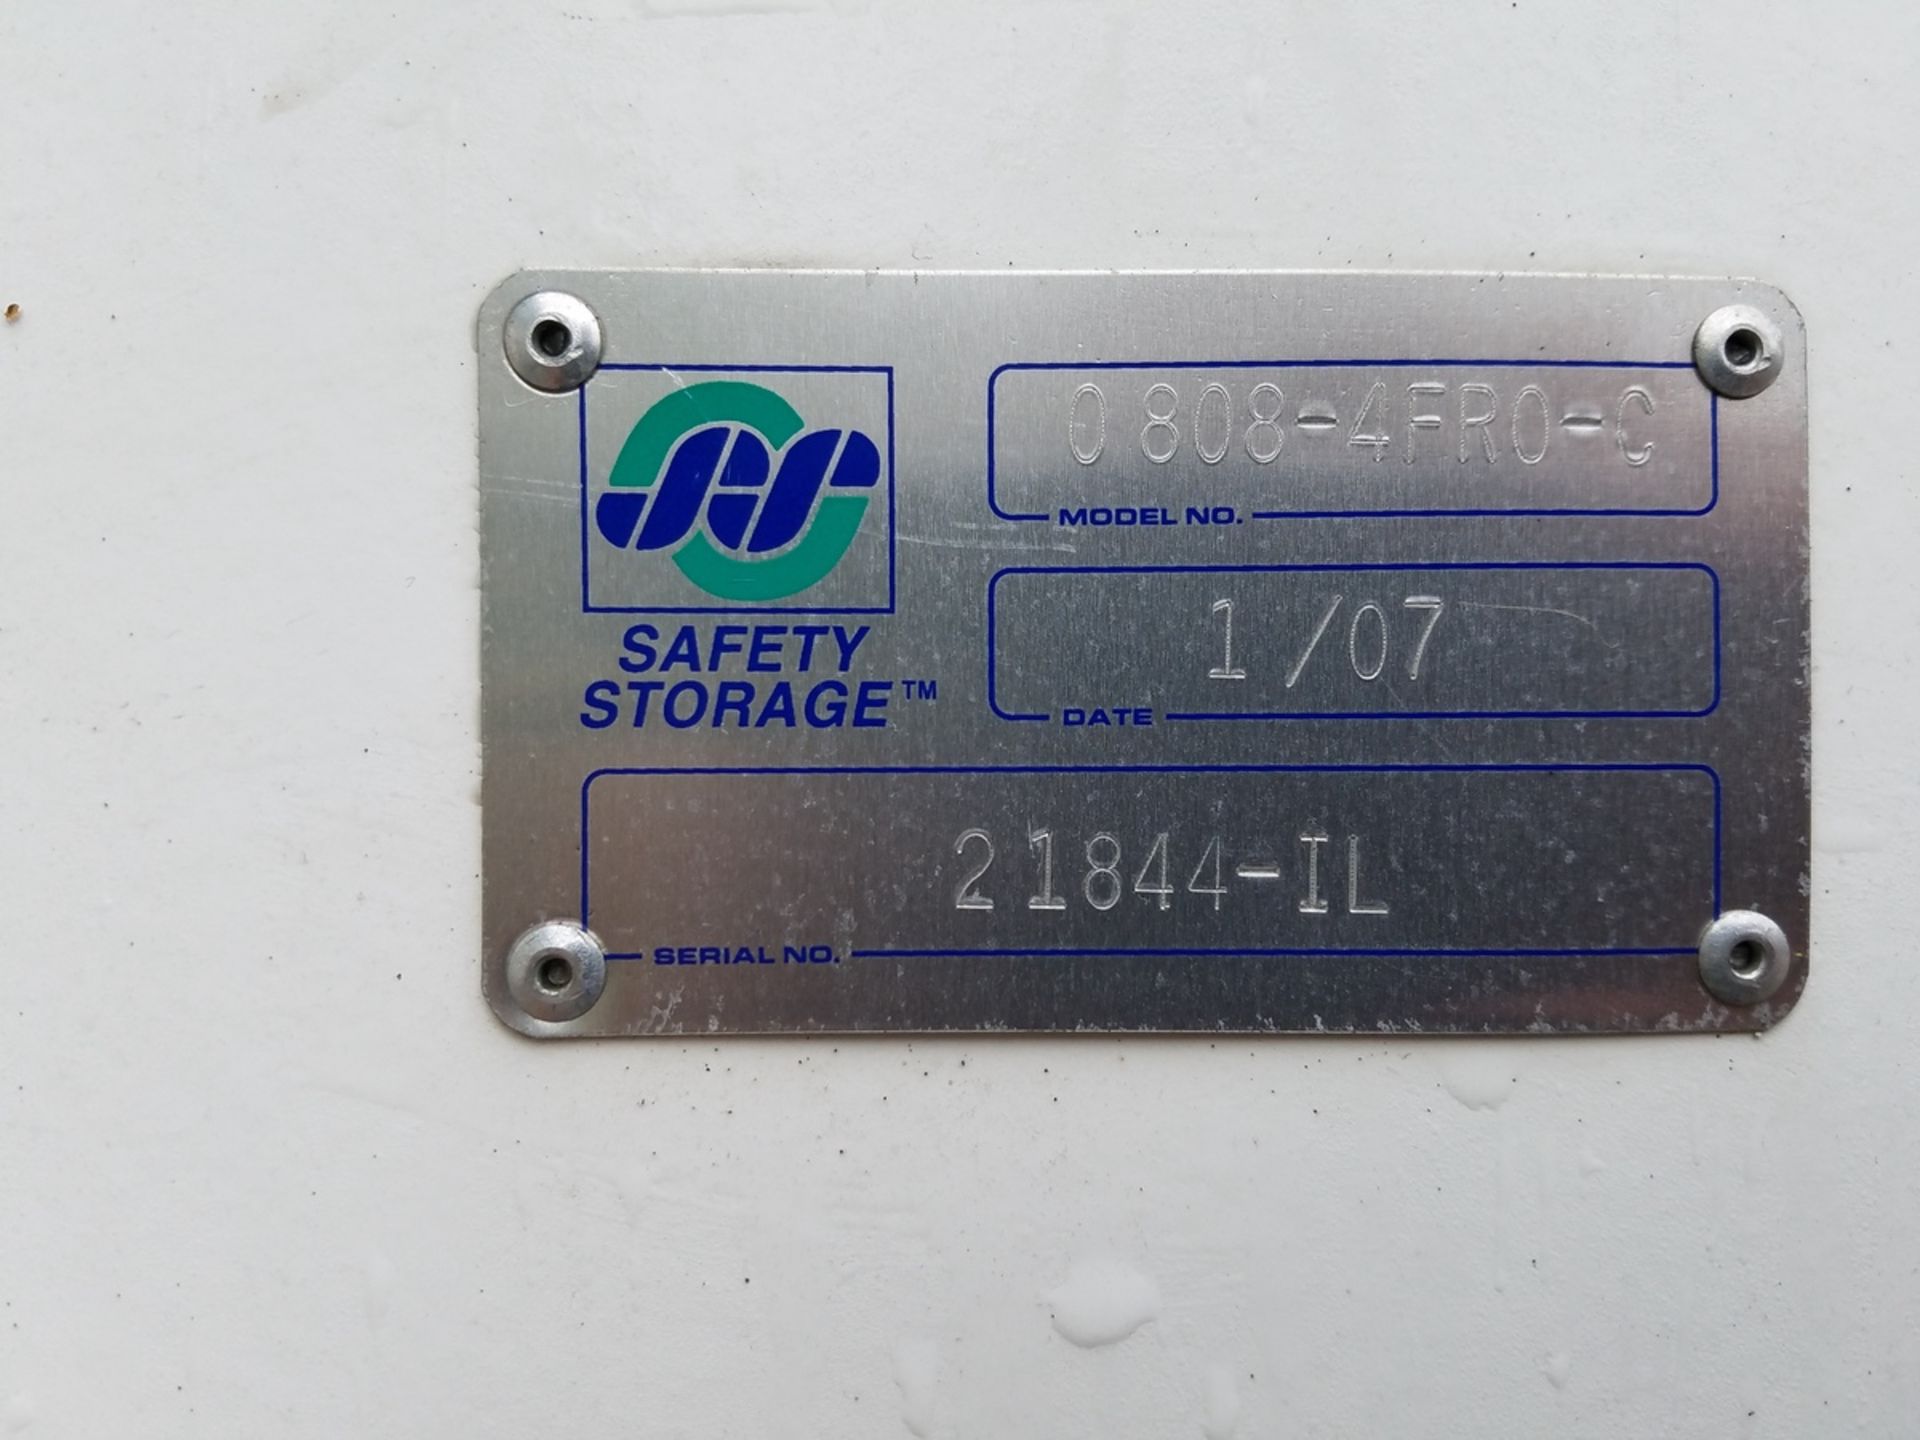 Safety Storage Container, M# 0808-4FR0-C, S/N 21844-IL | Rig Fee: $400 - Image 2 of 2